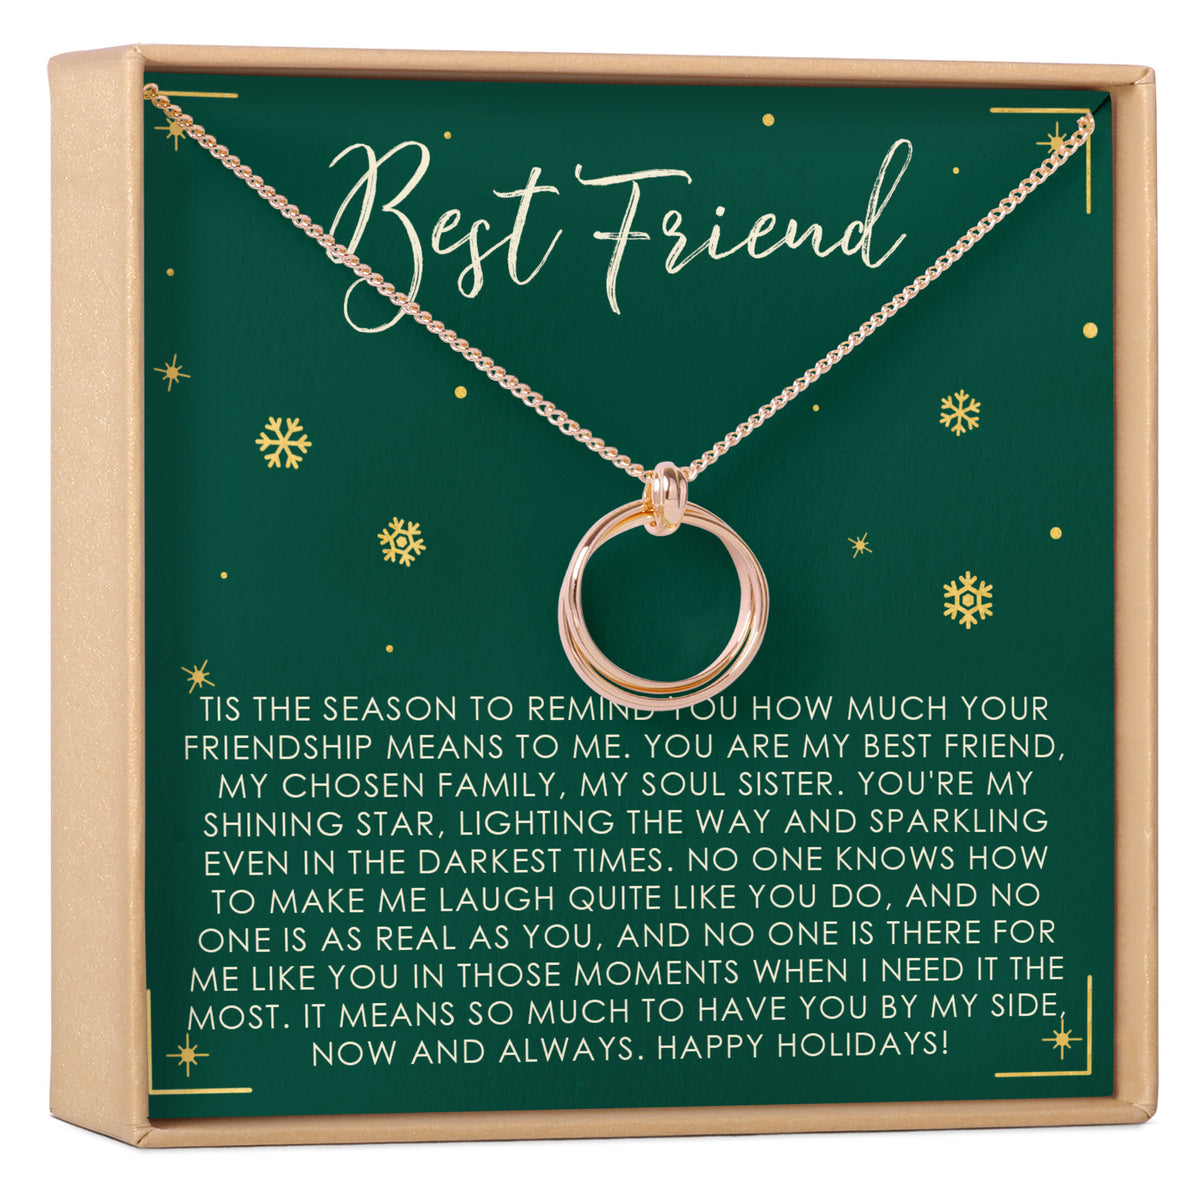 Gift Ideas: What's your pick this Friendship day - The Statesman